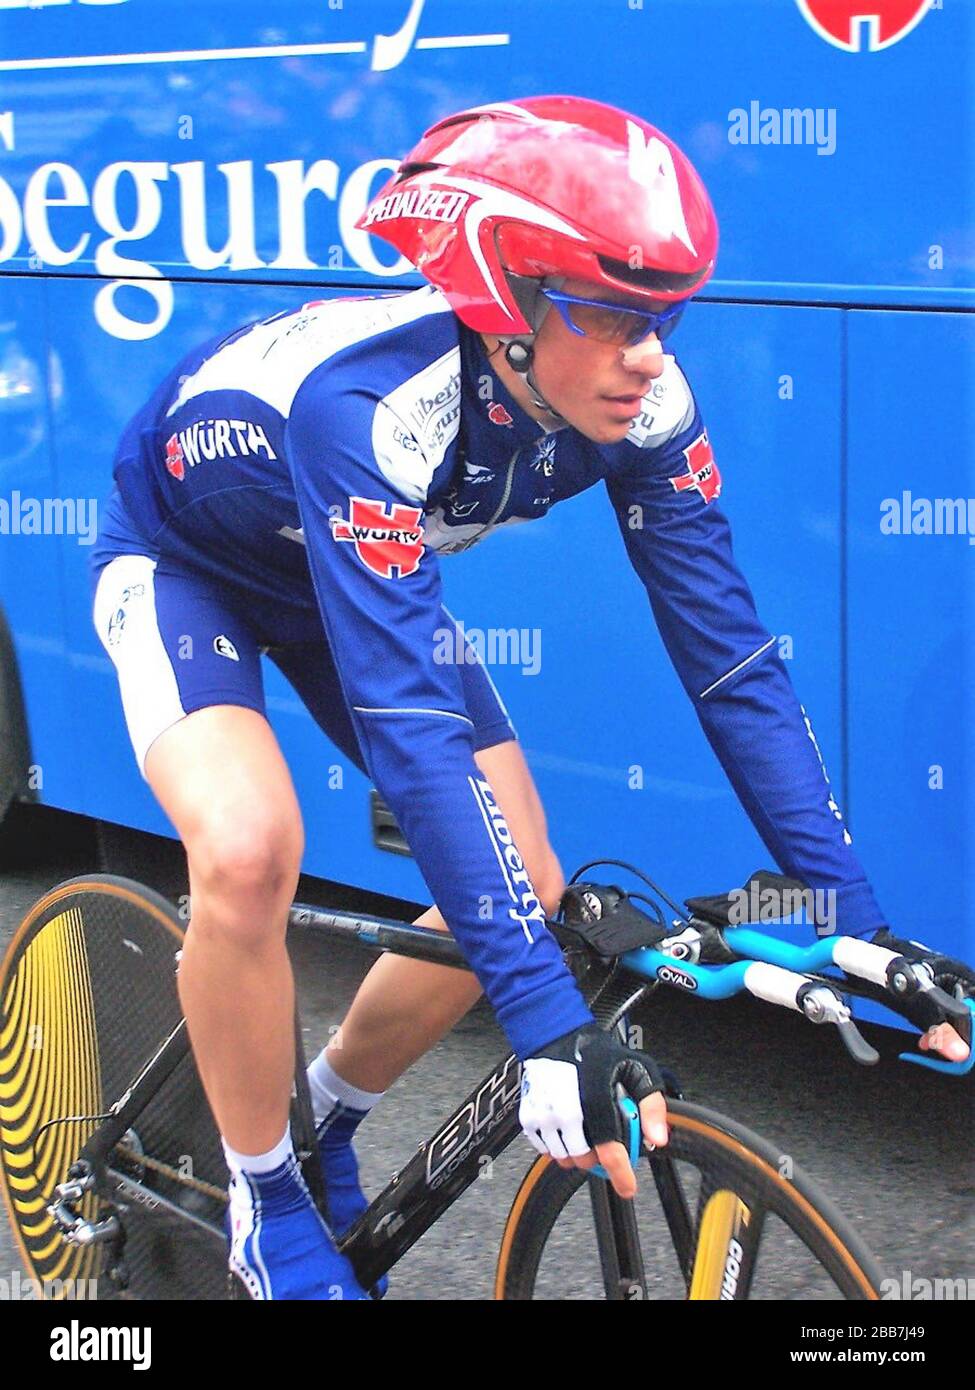 Alberto Contador   of Liberty Seguros during the Paris - Nice 2006, Prologue cycling race, Issy-les-Moulineaux(4,8 Km) on March 05, 2006 in Issy-les-Moulineaux, France - Photo Laurent Lairys / DPPI Stock Photo